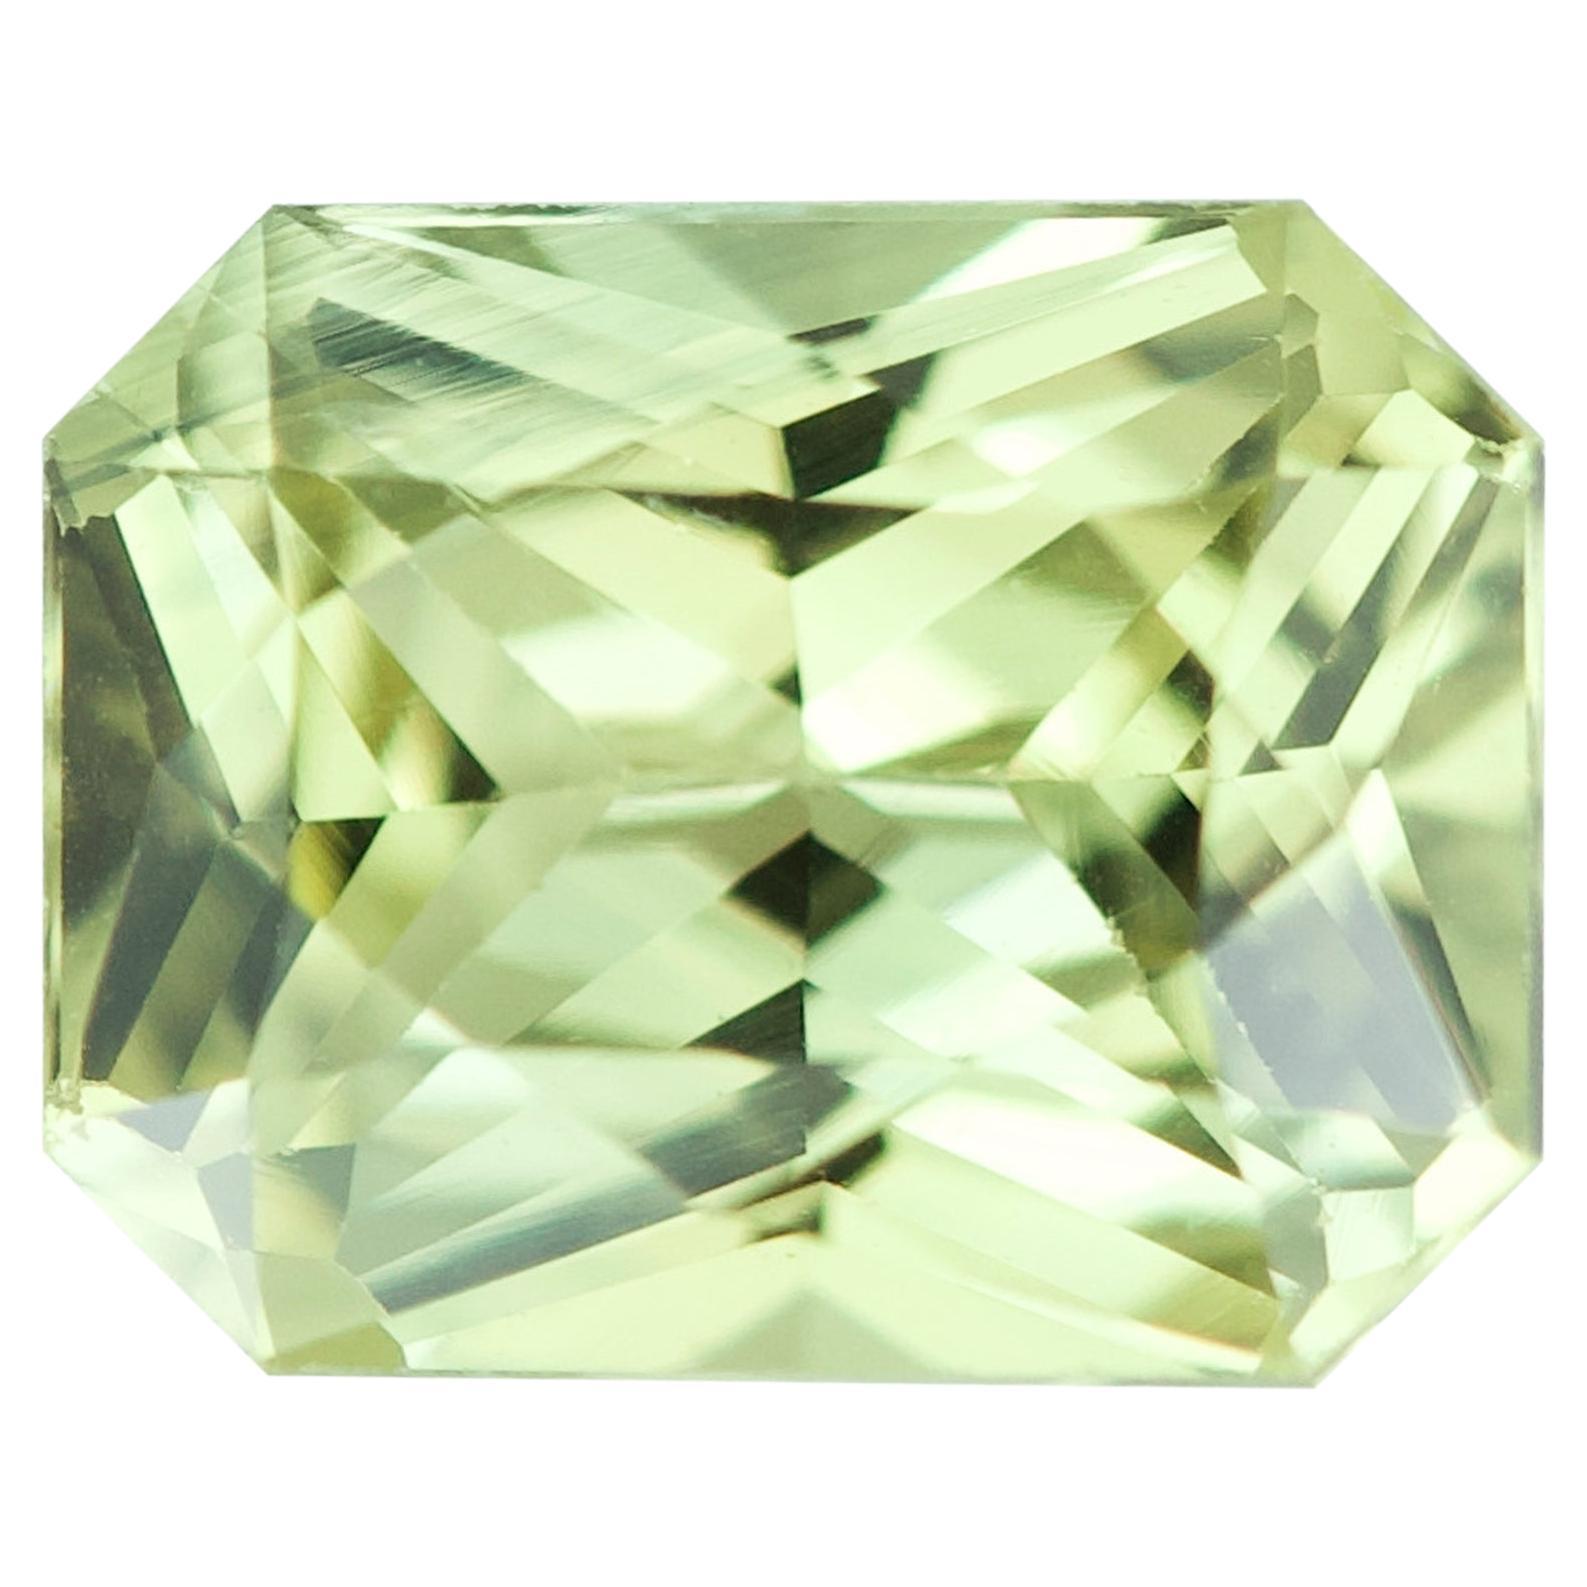 Mint Green Sapphire 1.69 ct Radiant Cut Unheated, Loose Gemstone For Sale